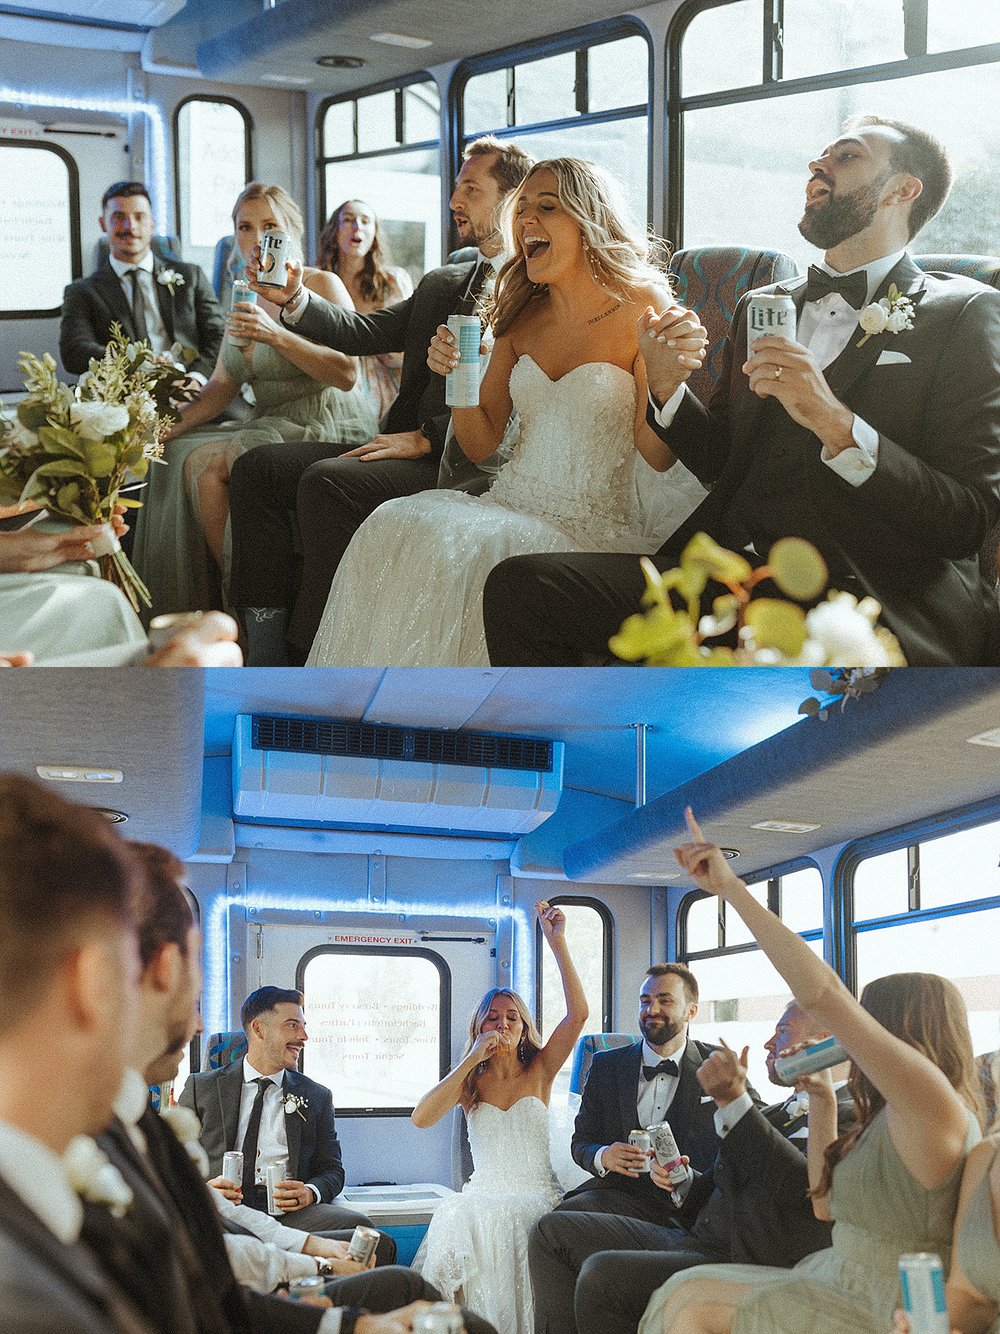  wedding party in bus after ceremony by Steph Photo Co 